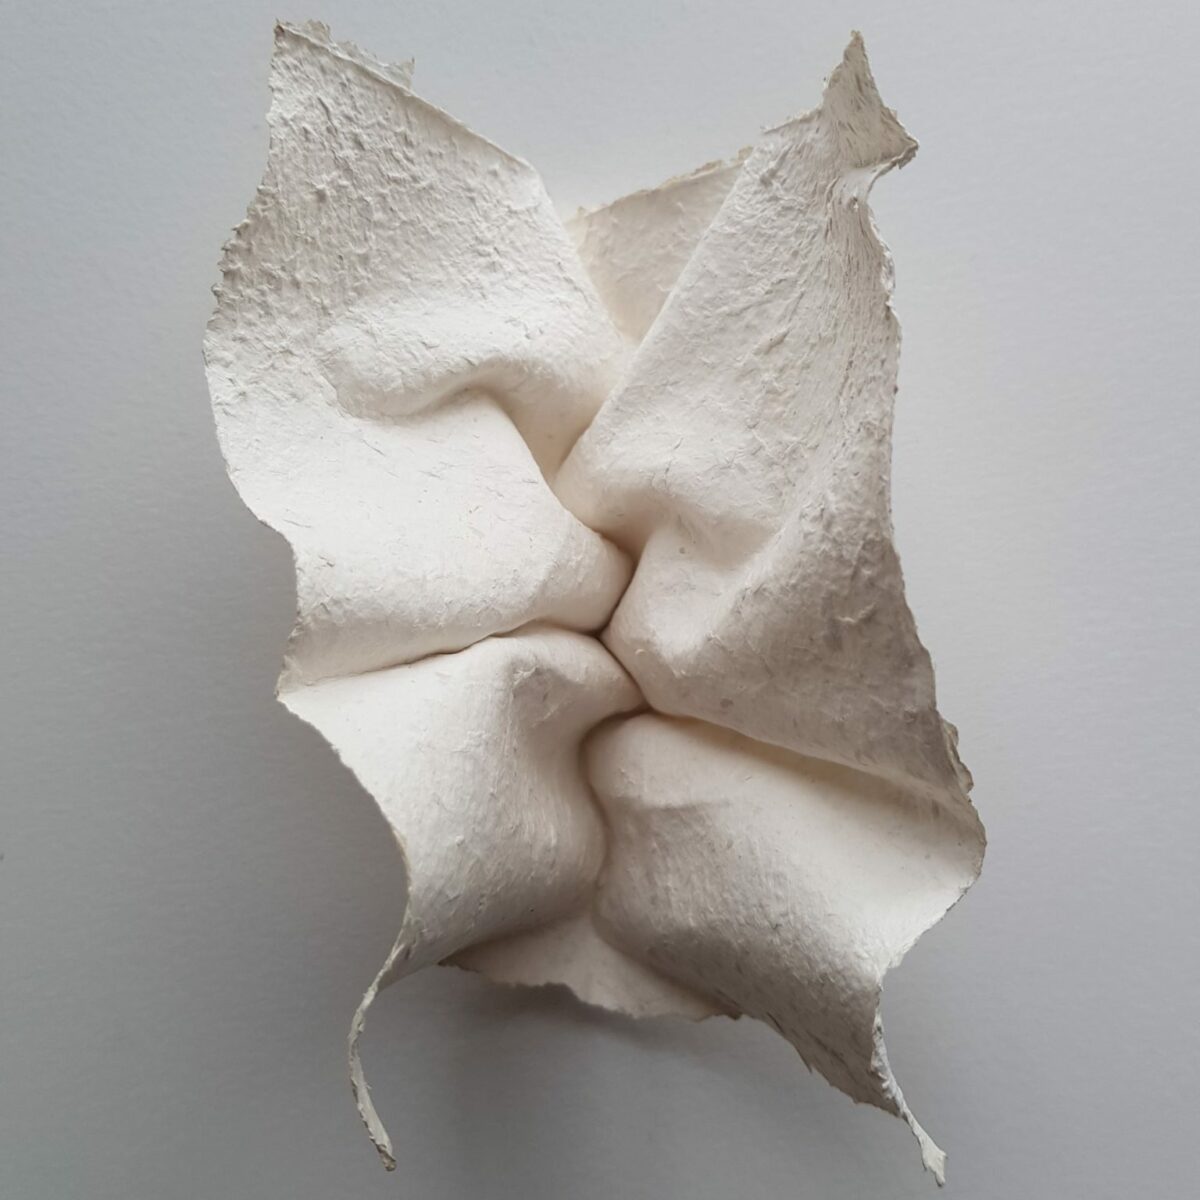 Fascinating facial sculptures made from folded paper sheets by Polly Verity